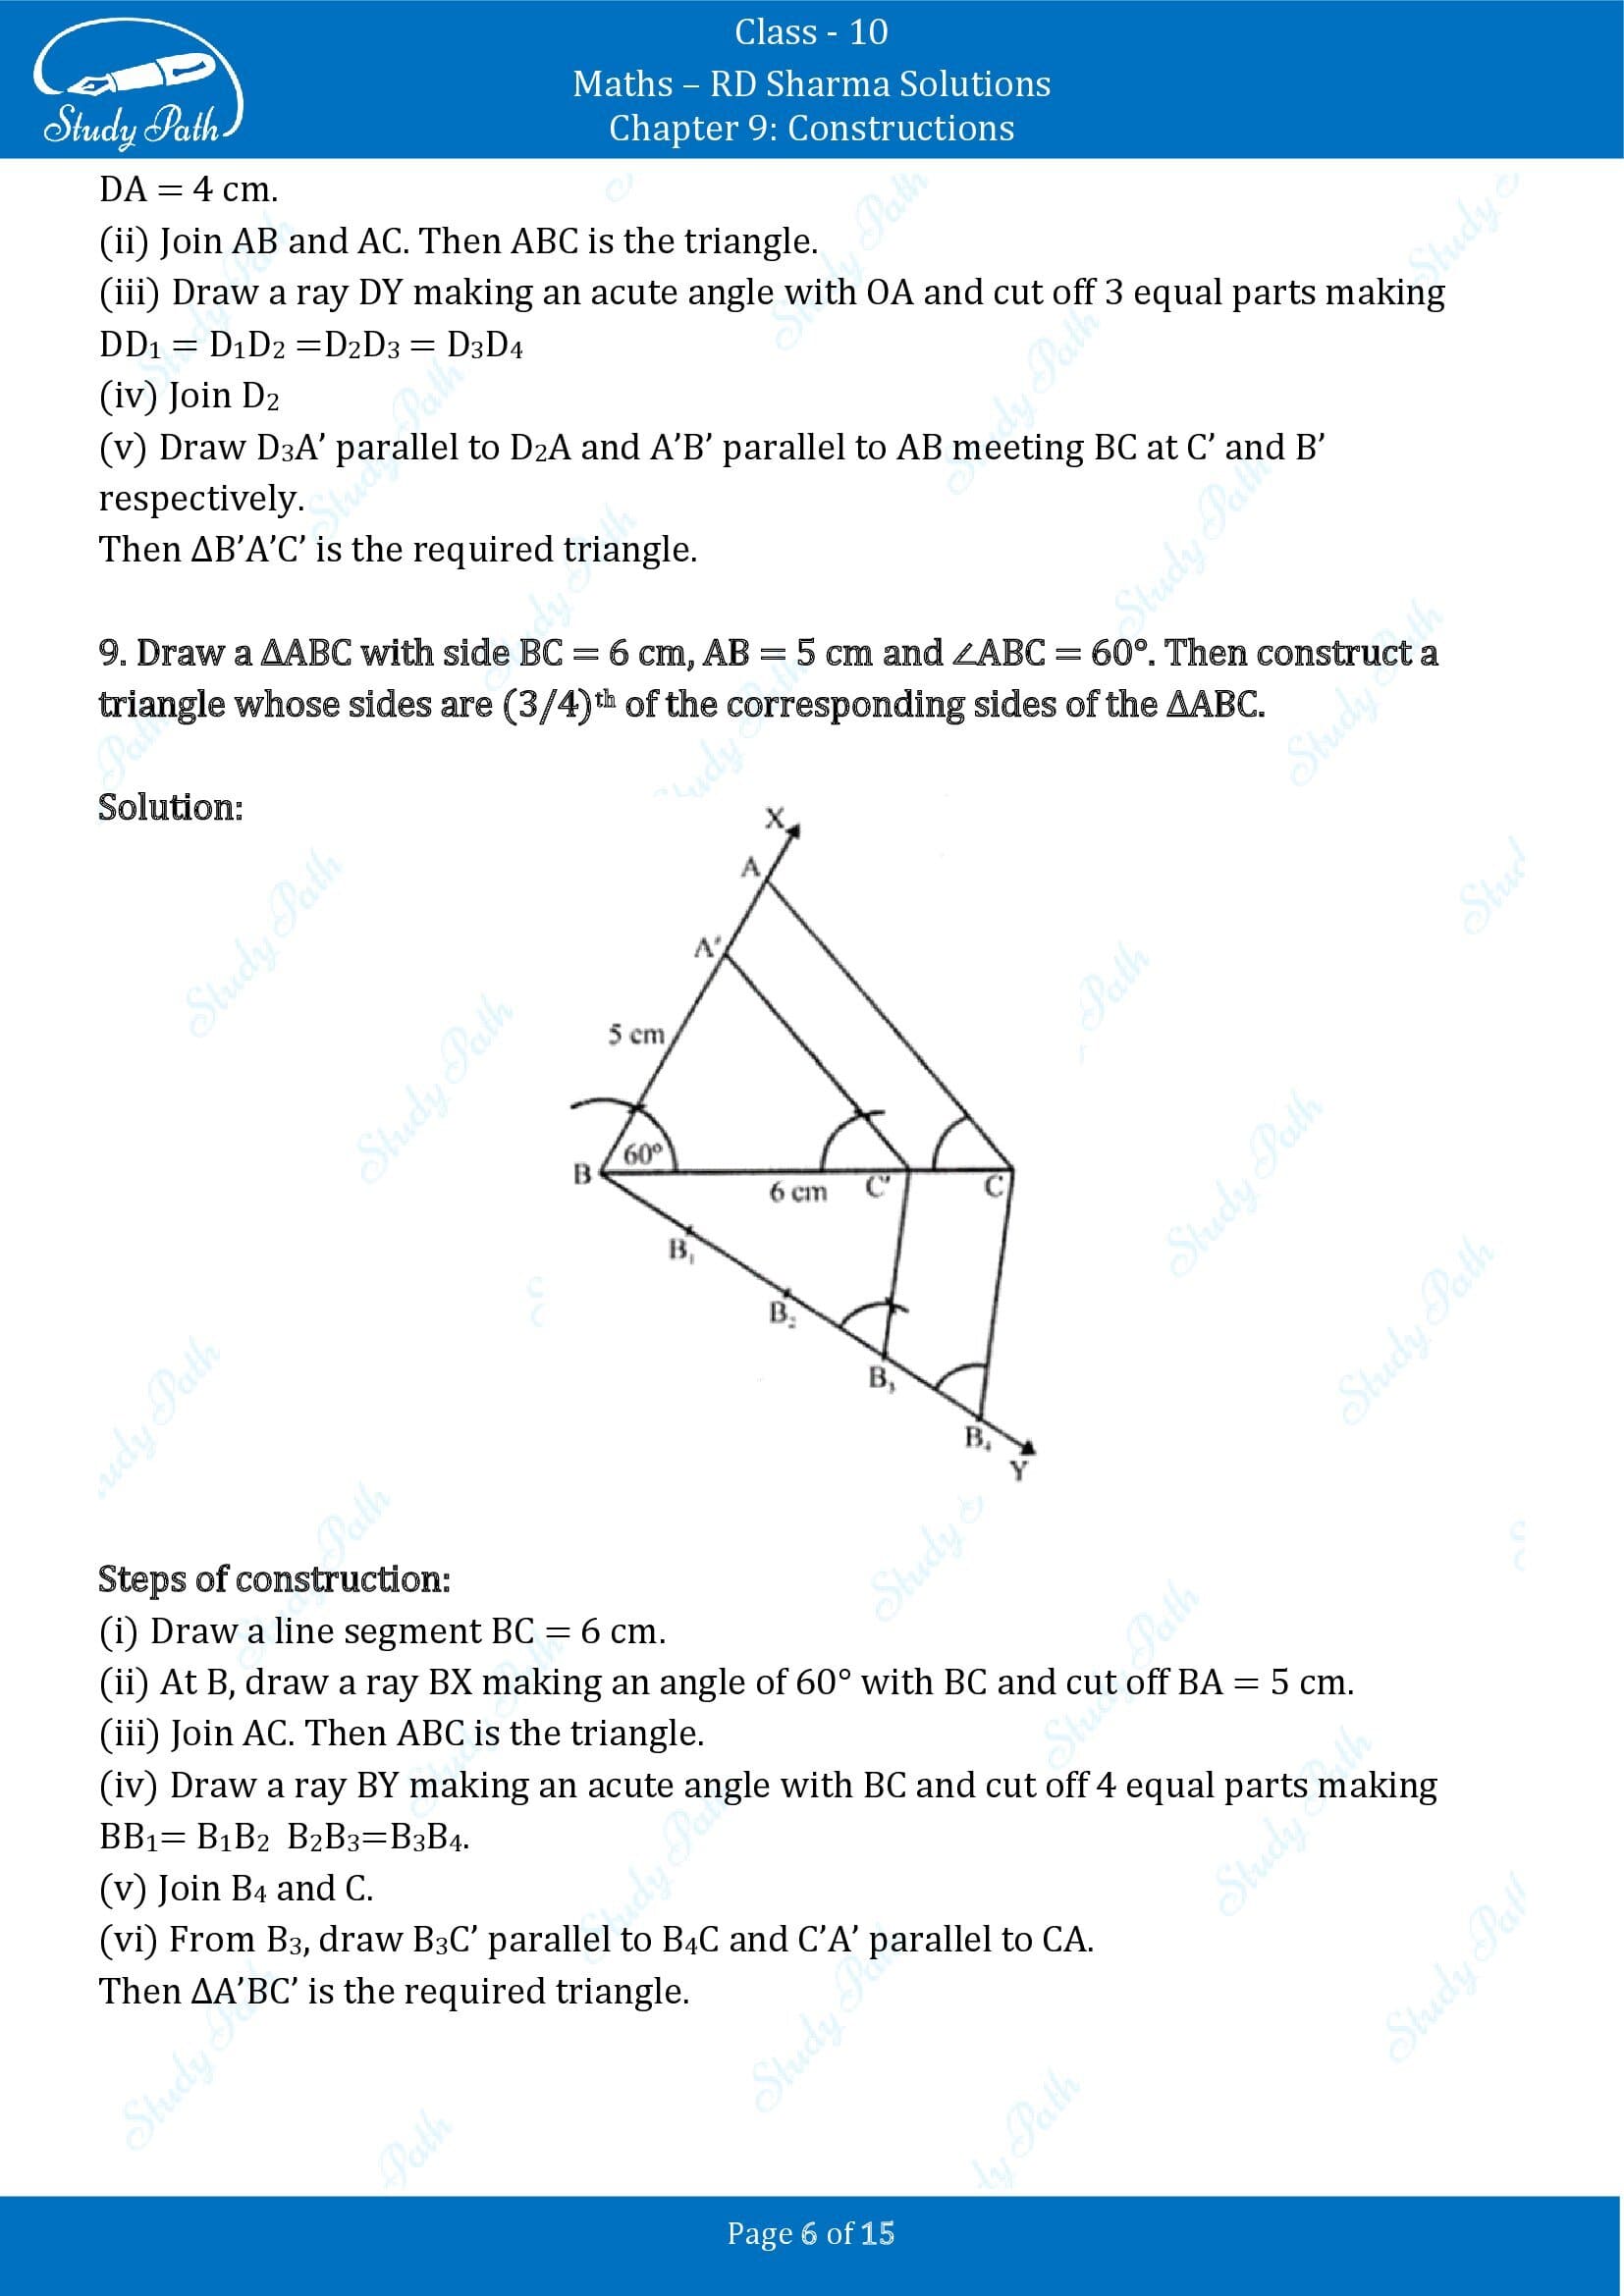 RD Sharma Solutions Class 10 Chapter 9 Constructions Exercise 9.2 00006